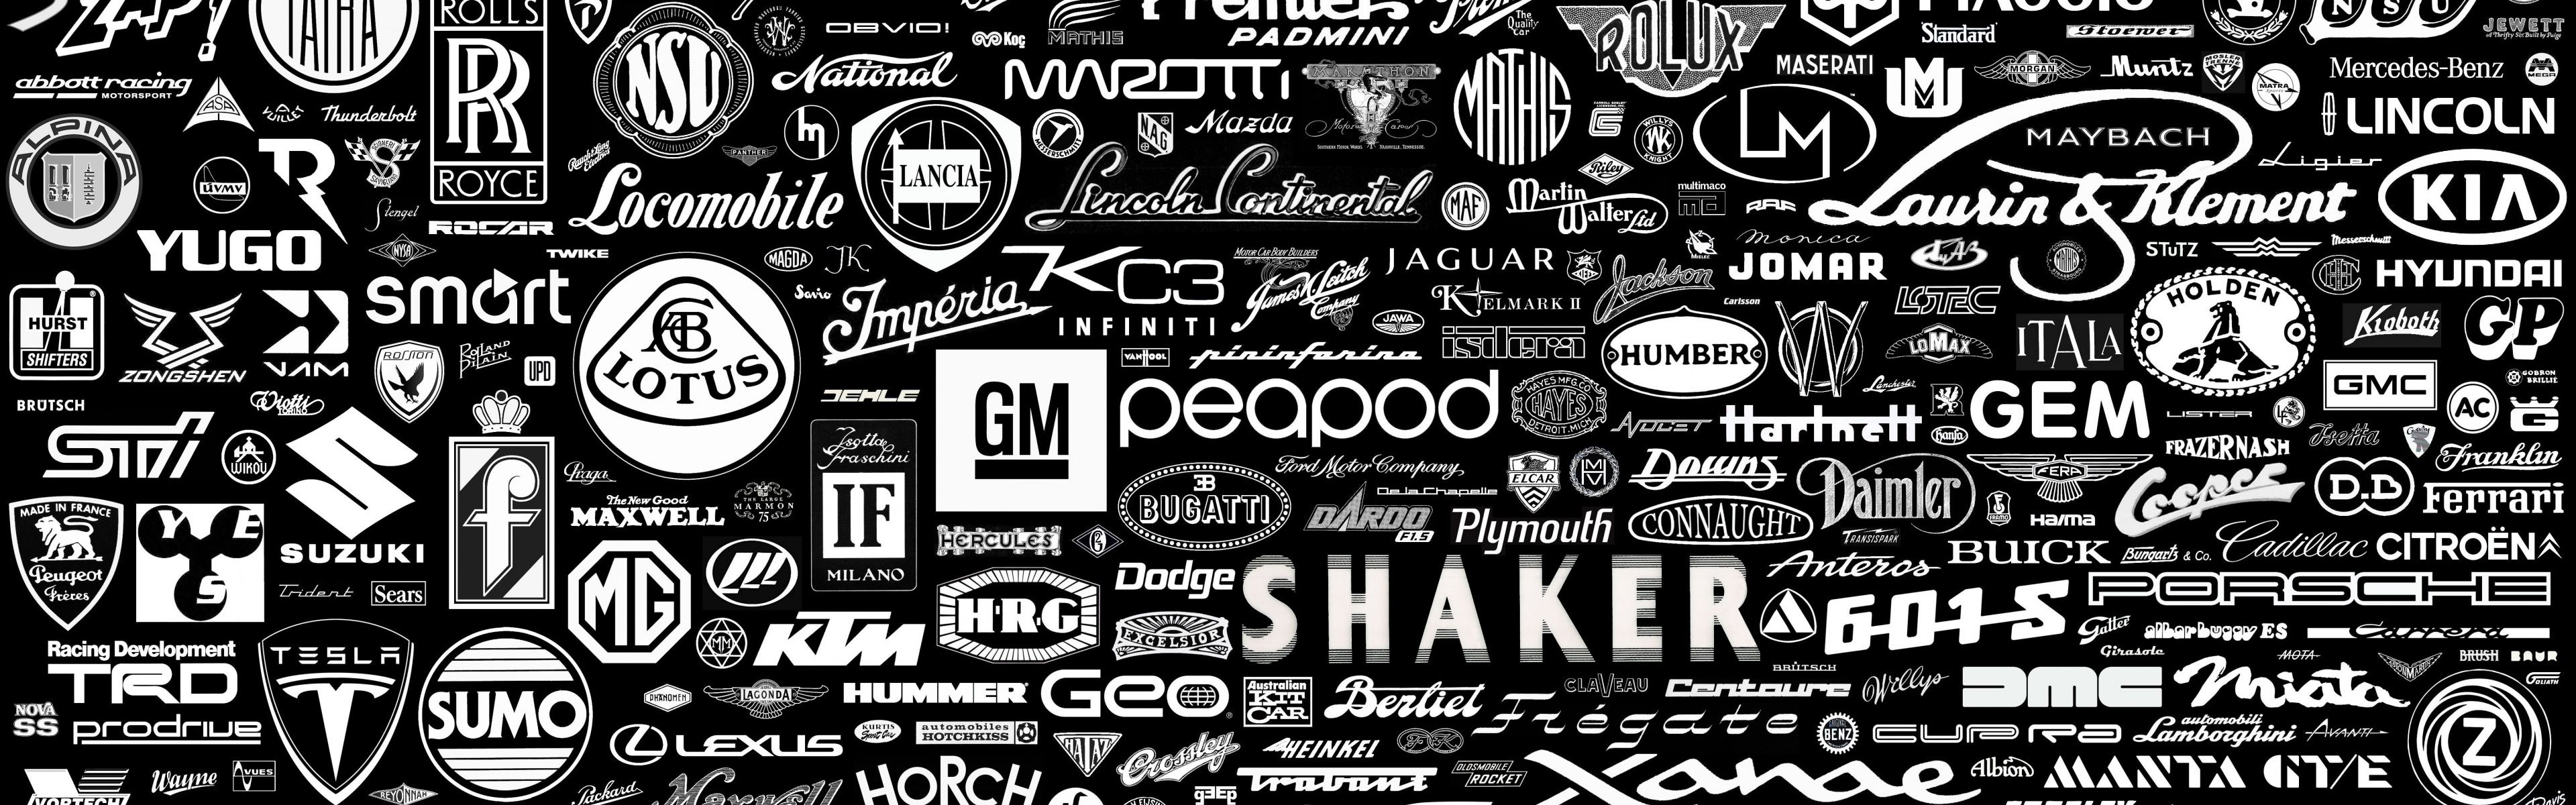 Brands HD Wallpaper, For Free Download